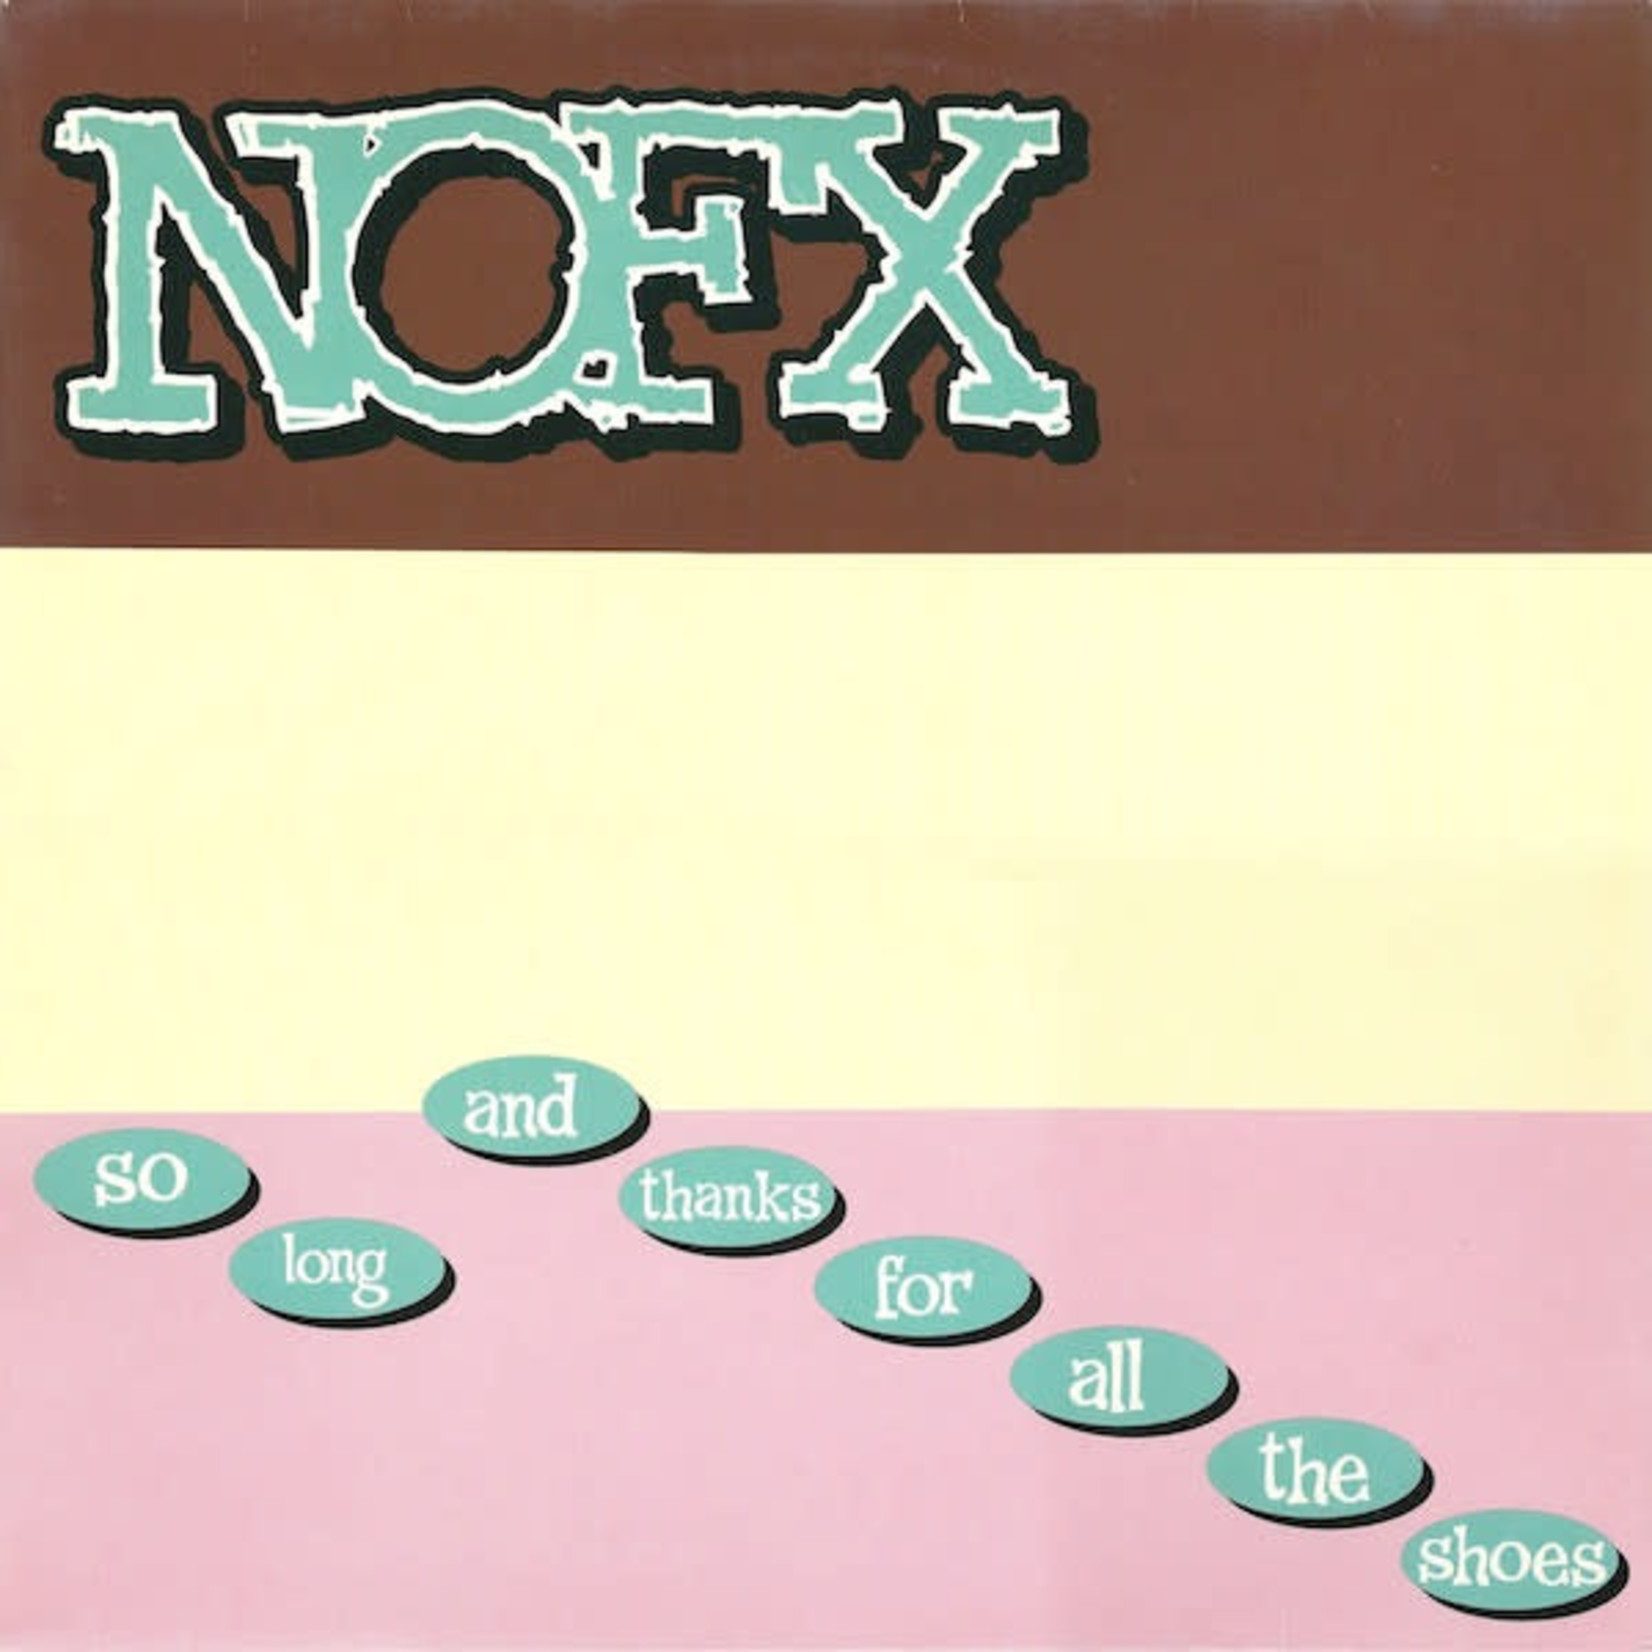 [New] NOFX - So Long And Thanks For.. (25th anniversary, neapolitan striped vinyl)